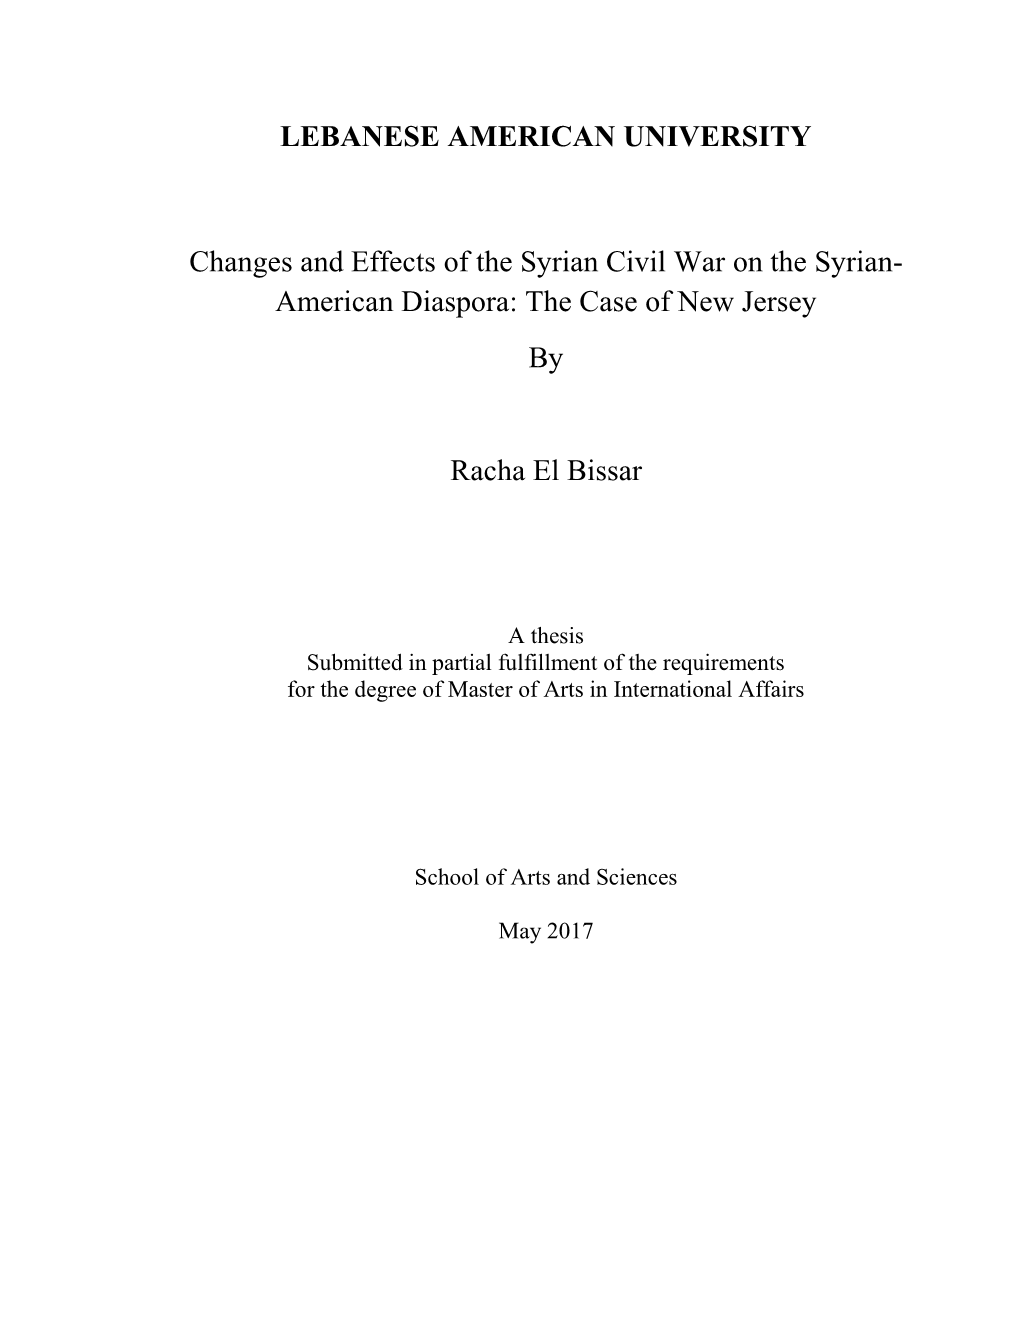 LEBANESE AMERICAN UNIVERSITY Changes and Effects of the Syrian Civil War on the Syrian- American Diaspora: the Case of New Jerse